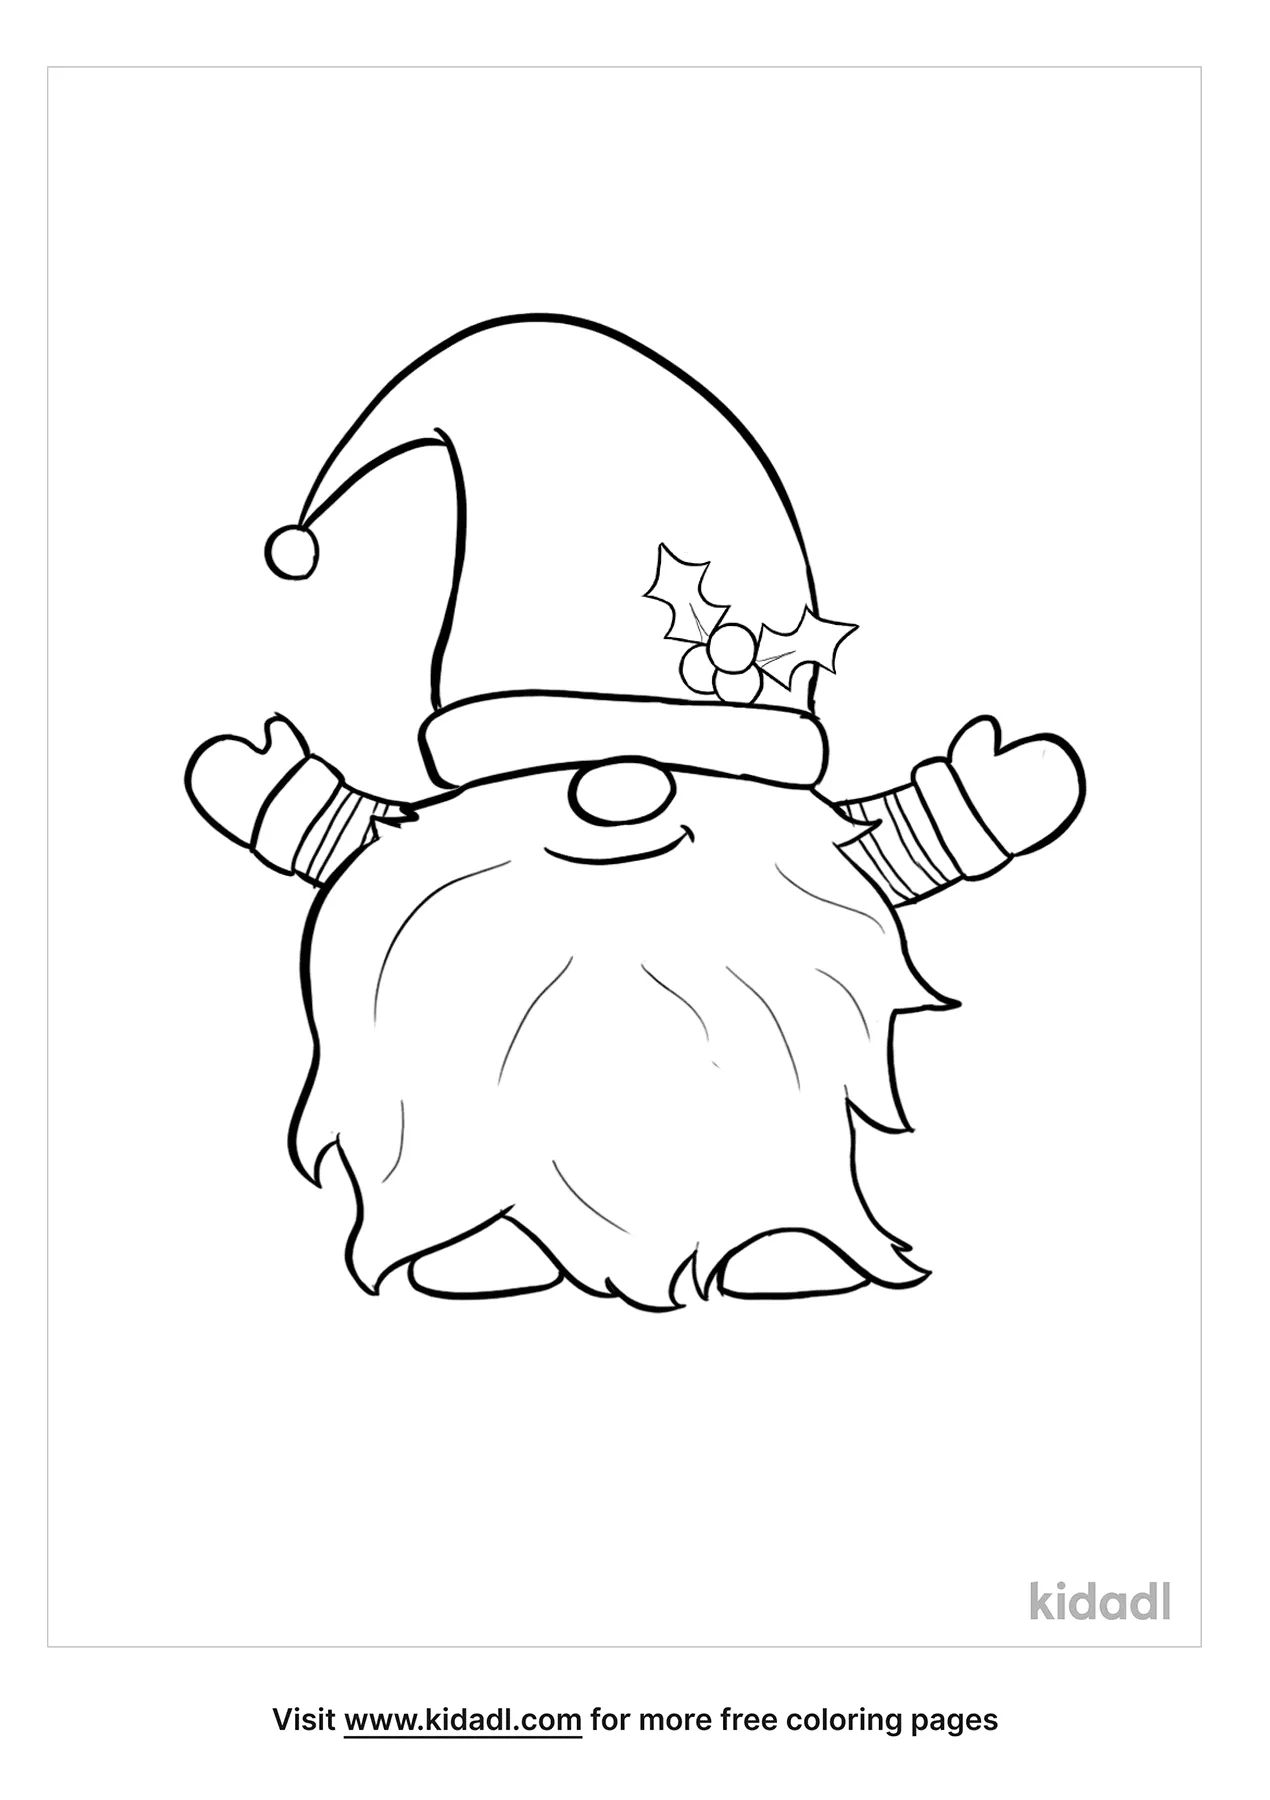 gnome coloring pages